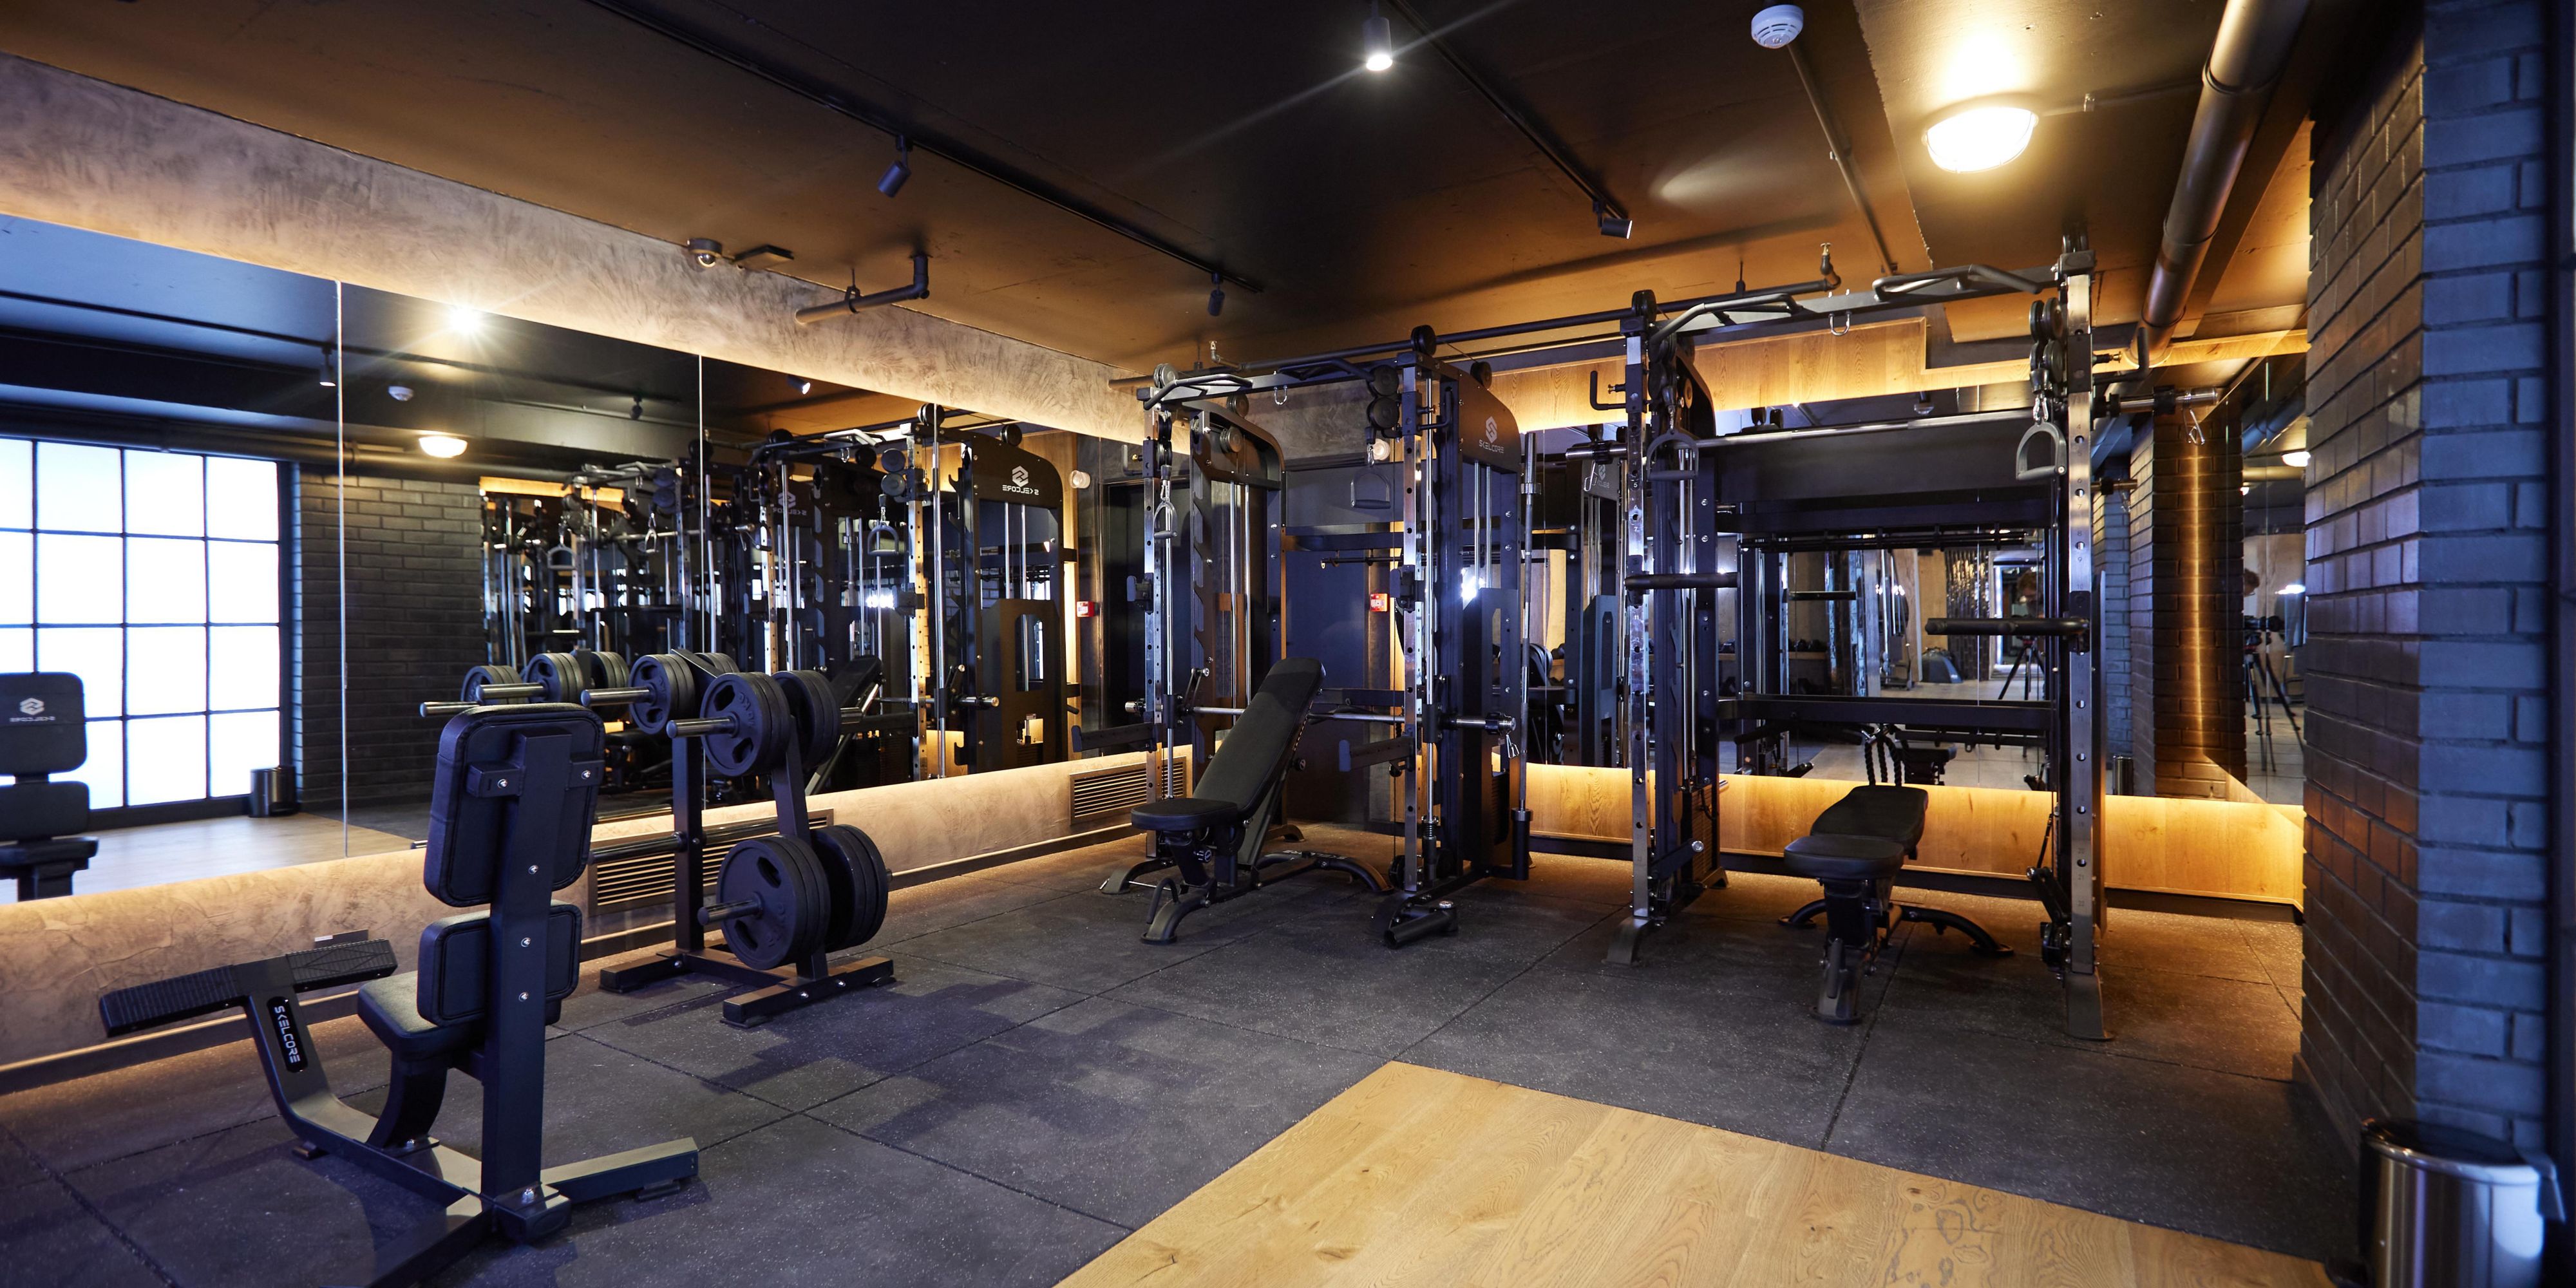 Enjoy the facilities of our recently upgraded Gym facilities for a full workout in our dedicated Cardio, Strength and Fitness sections. Open 24 hours and complimentary access to all voco guests. 